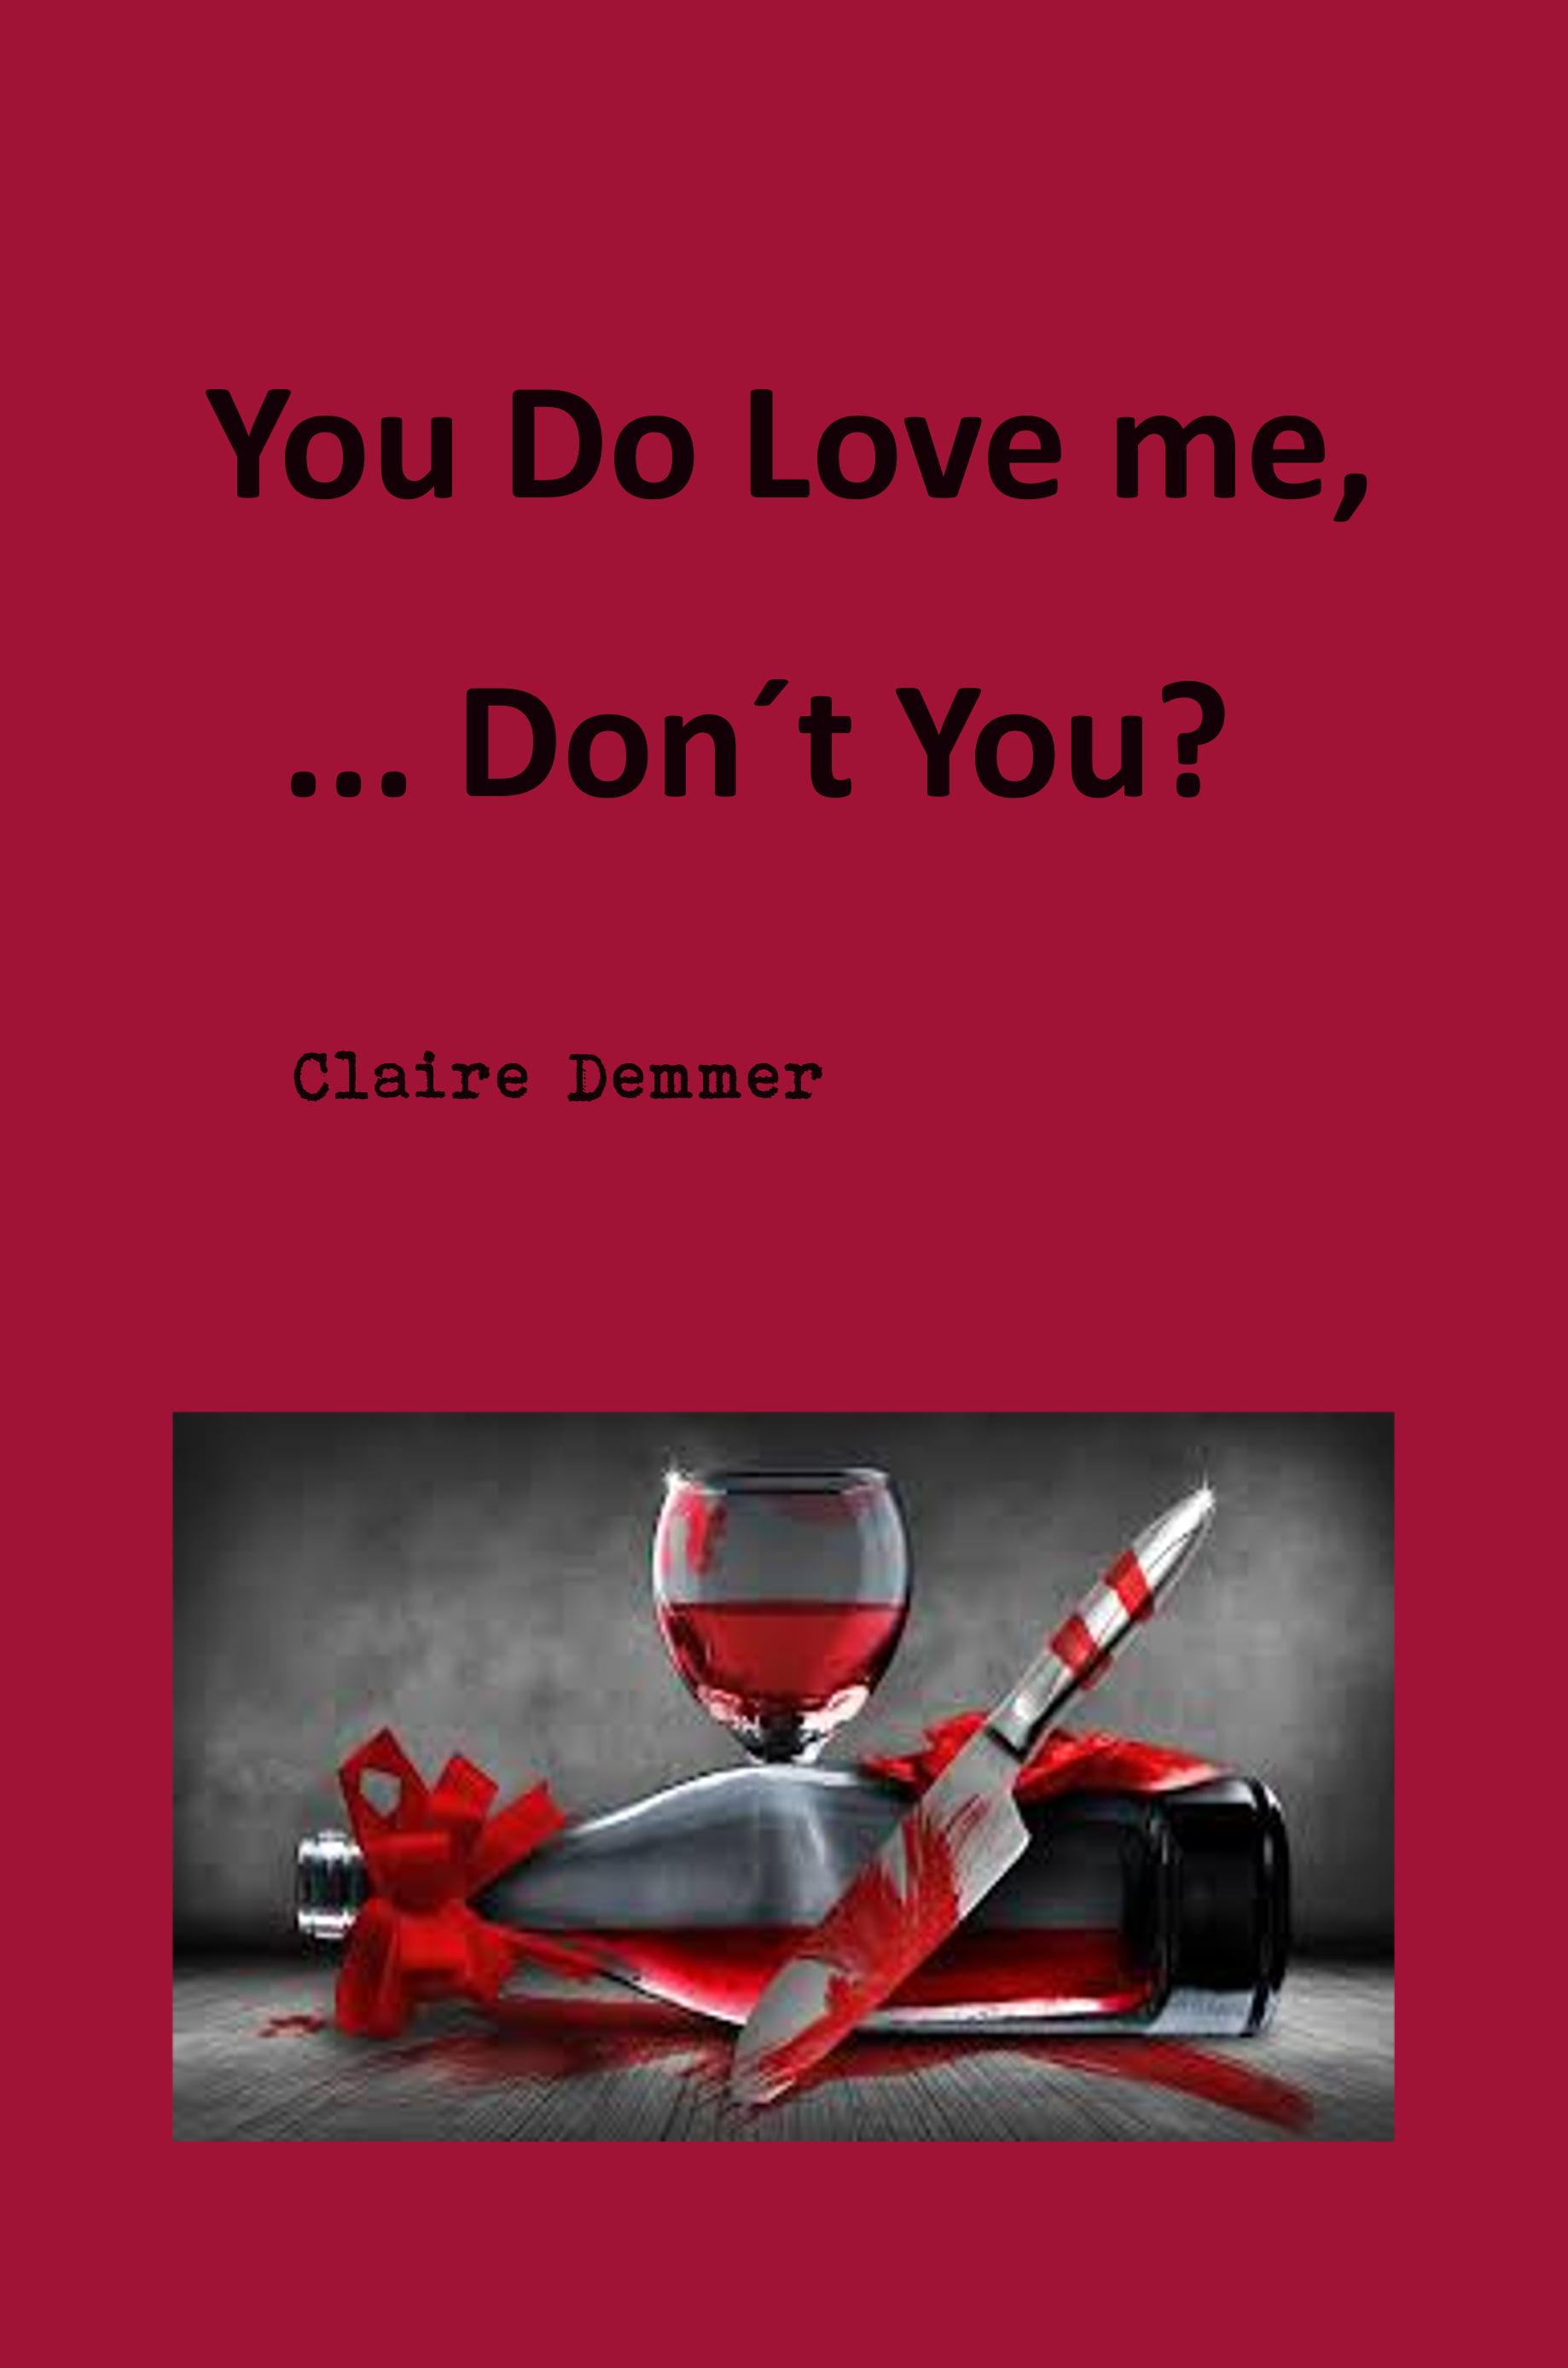 You do love me, don't you? Funny psycho thriller script